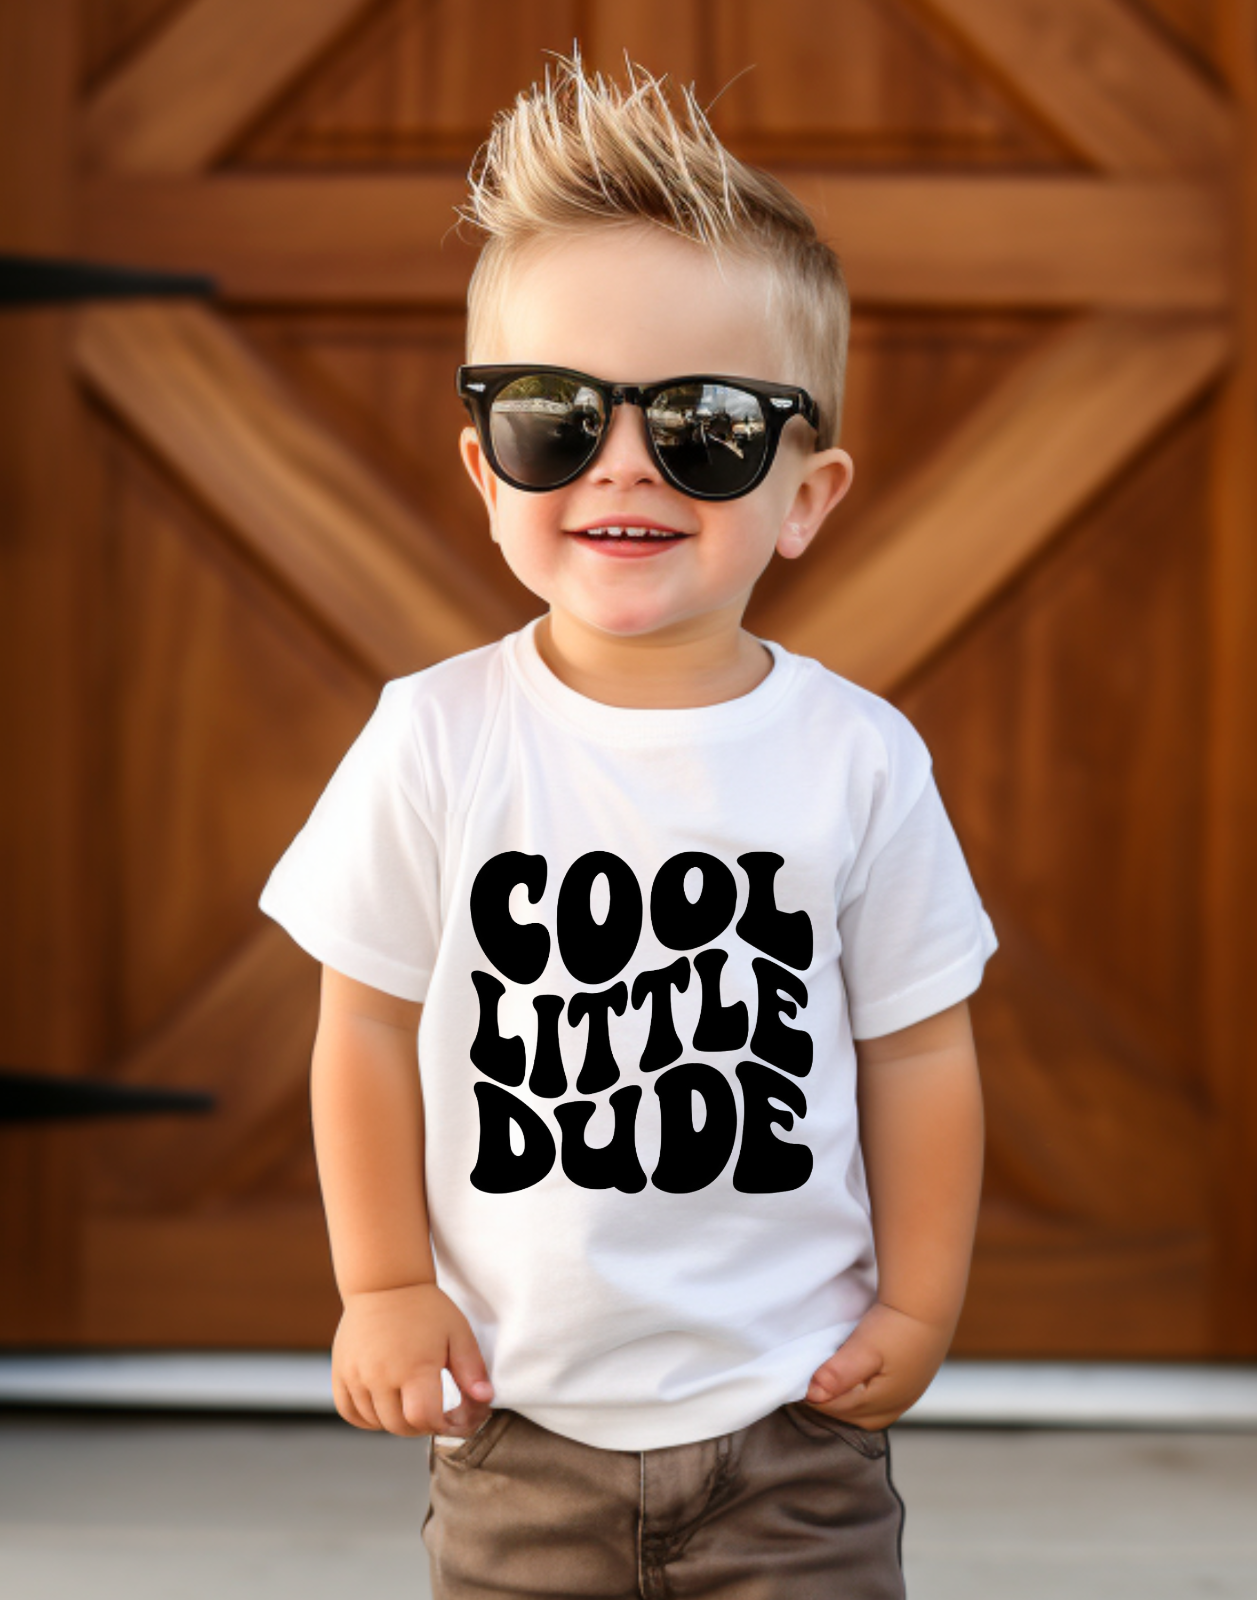 Primary image for Cool Little Dude Graphic Tee T-Shirt Funny Kids Toddler Baby Boy